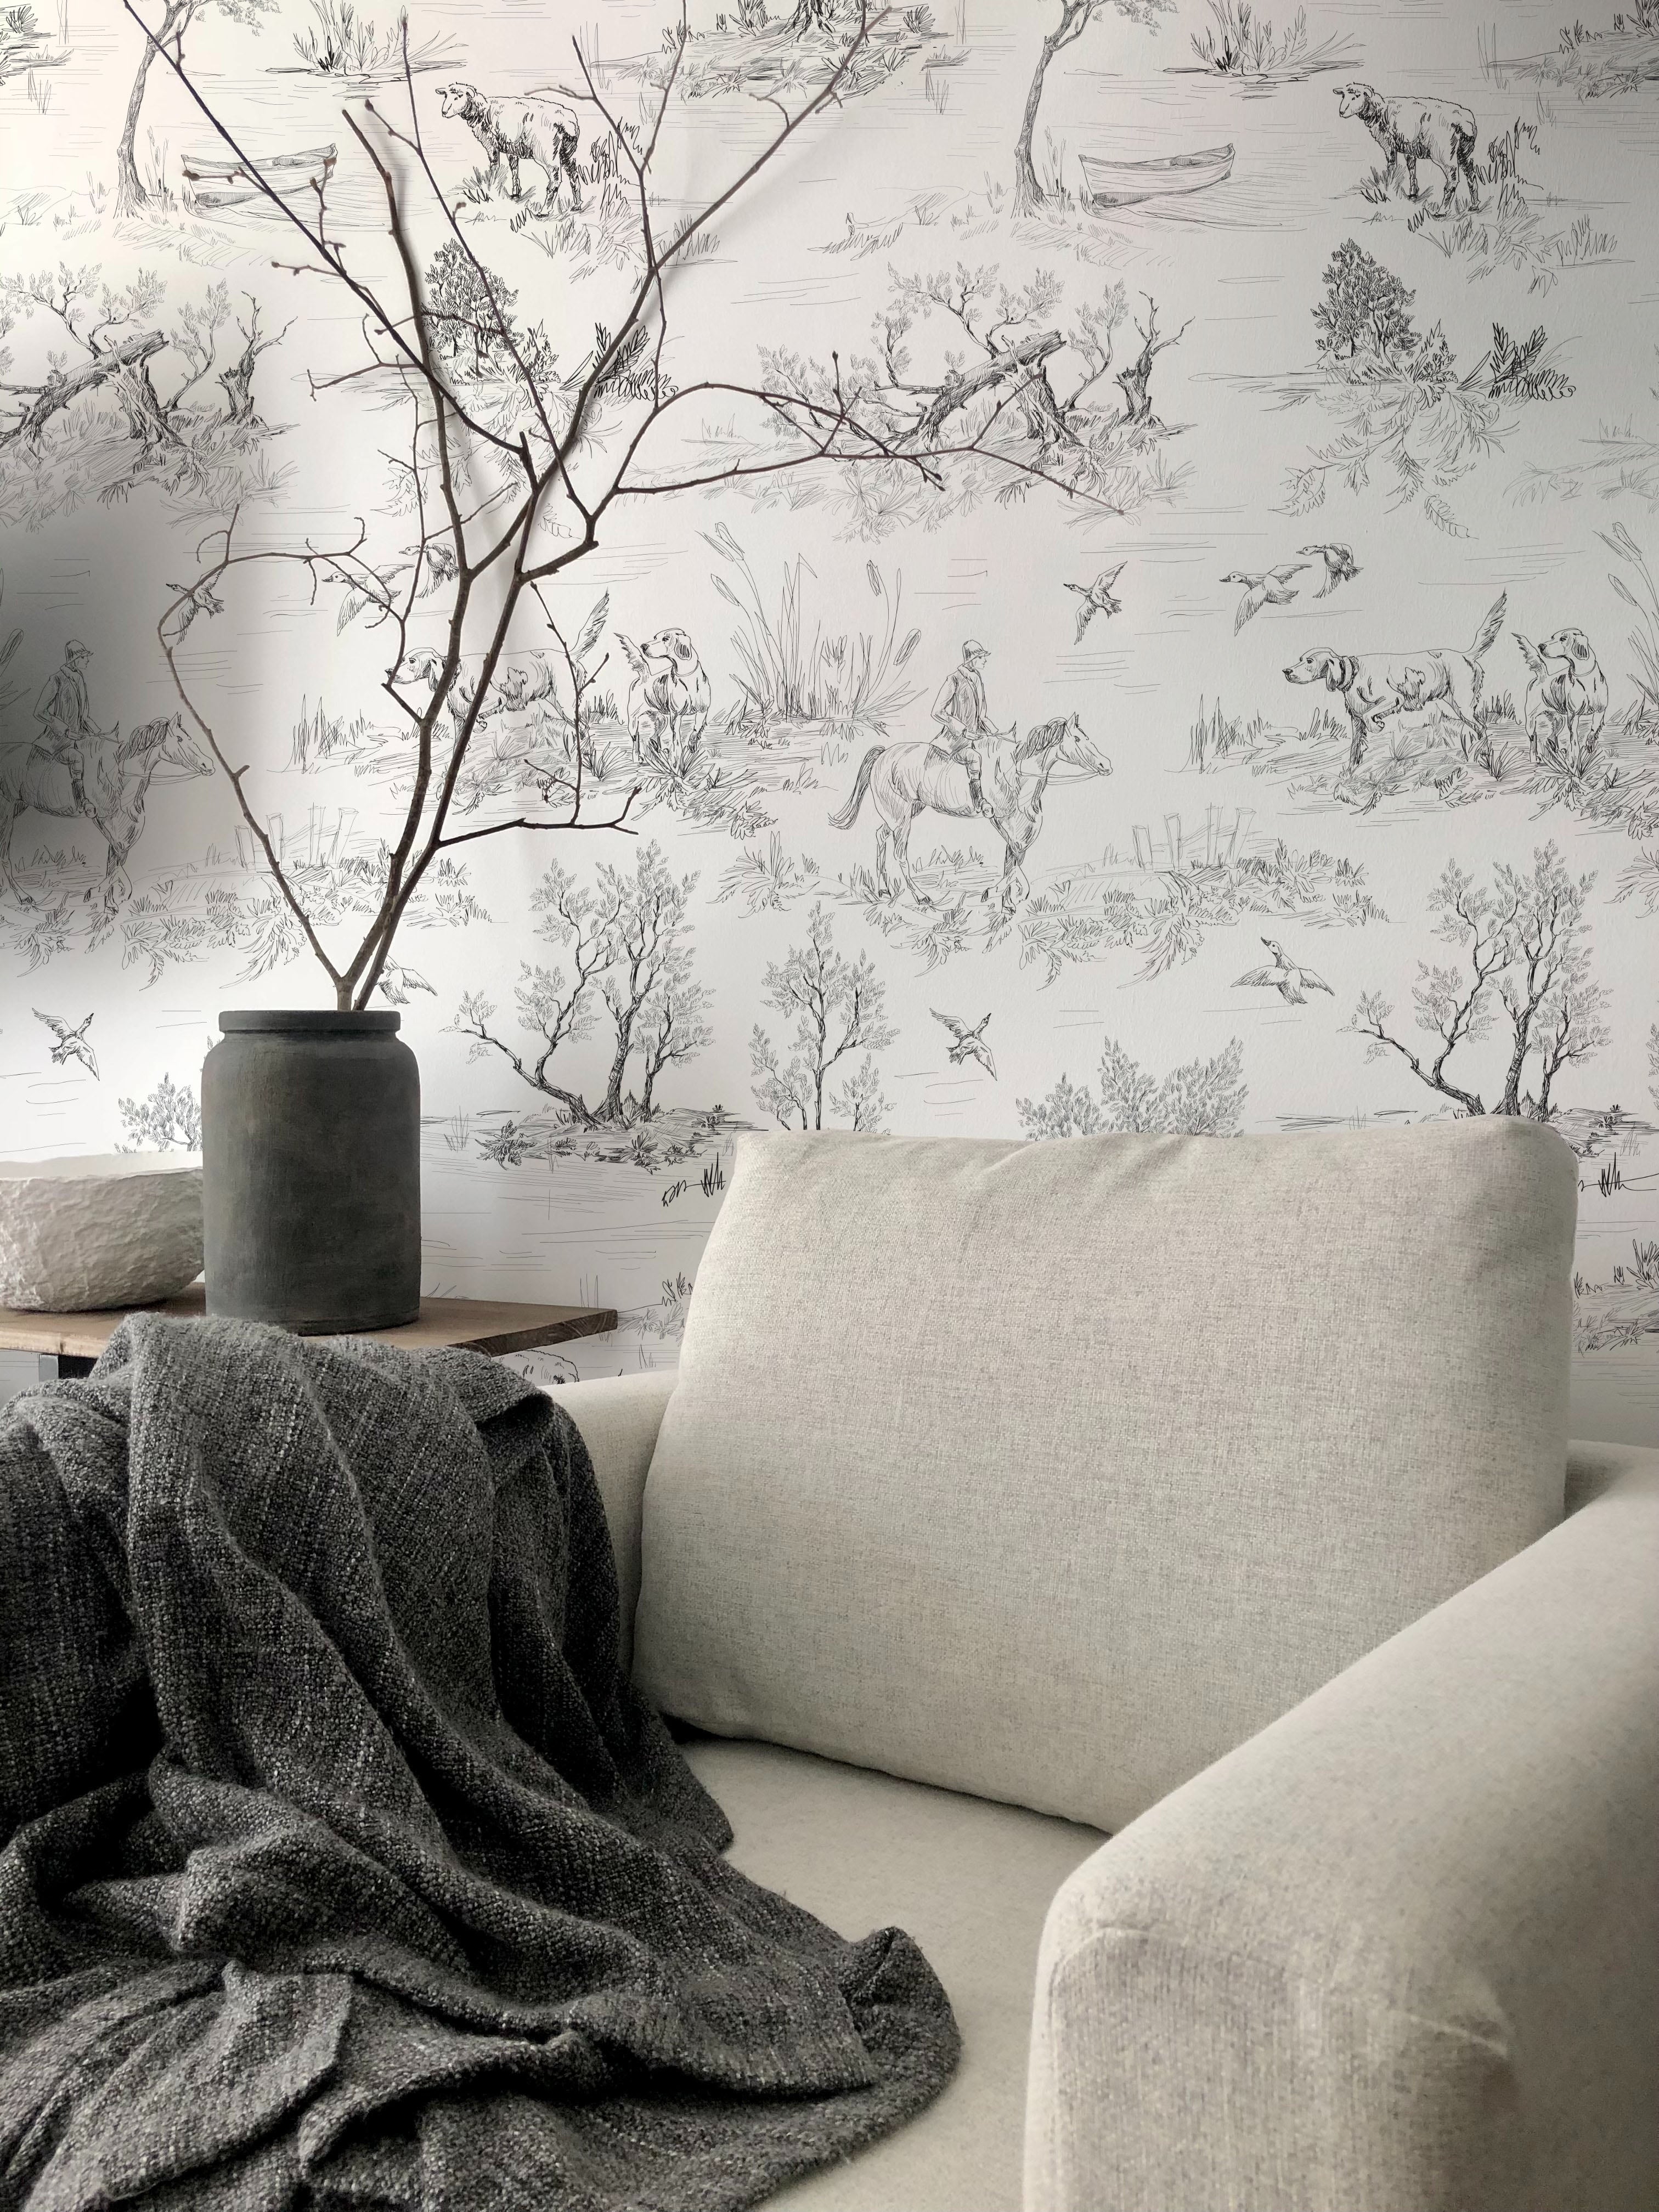 The Art of Pairing: Coordinating Wallpaper with Furniture and Decor